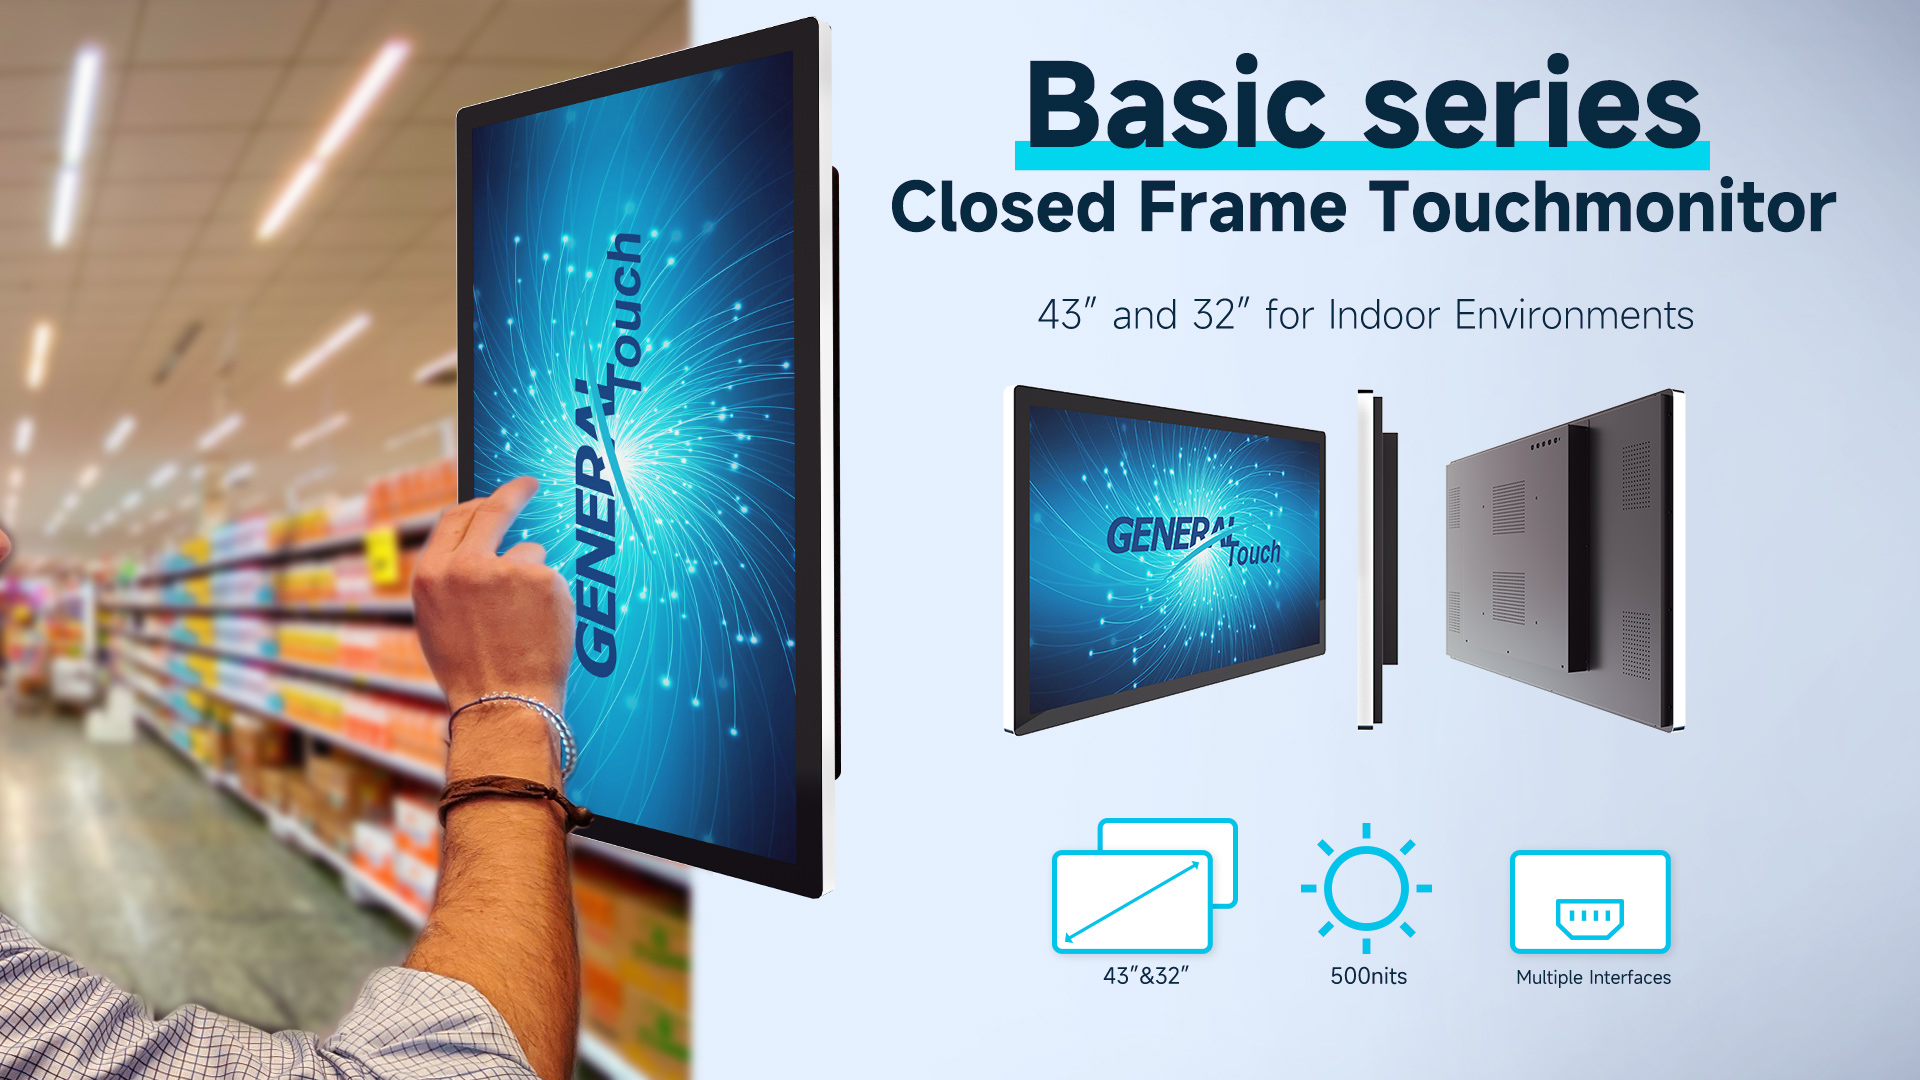 LCD Monitor] Touch screen function introduction